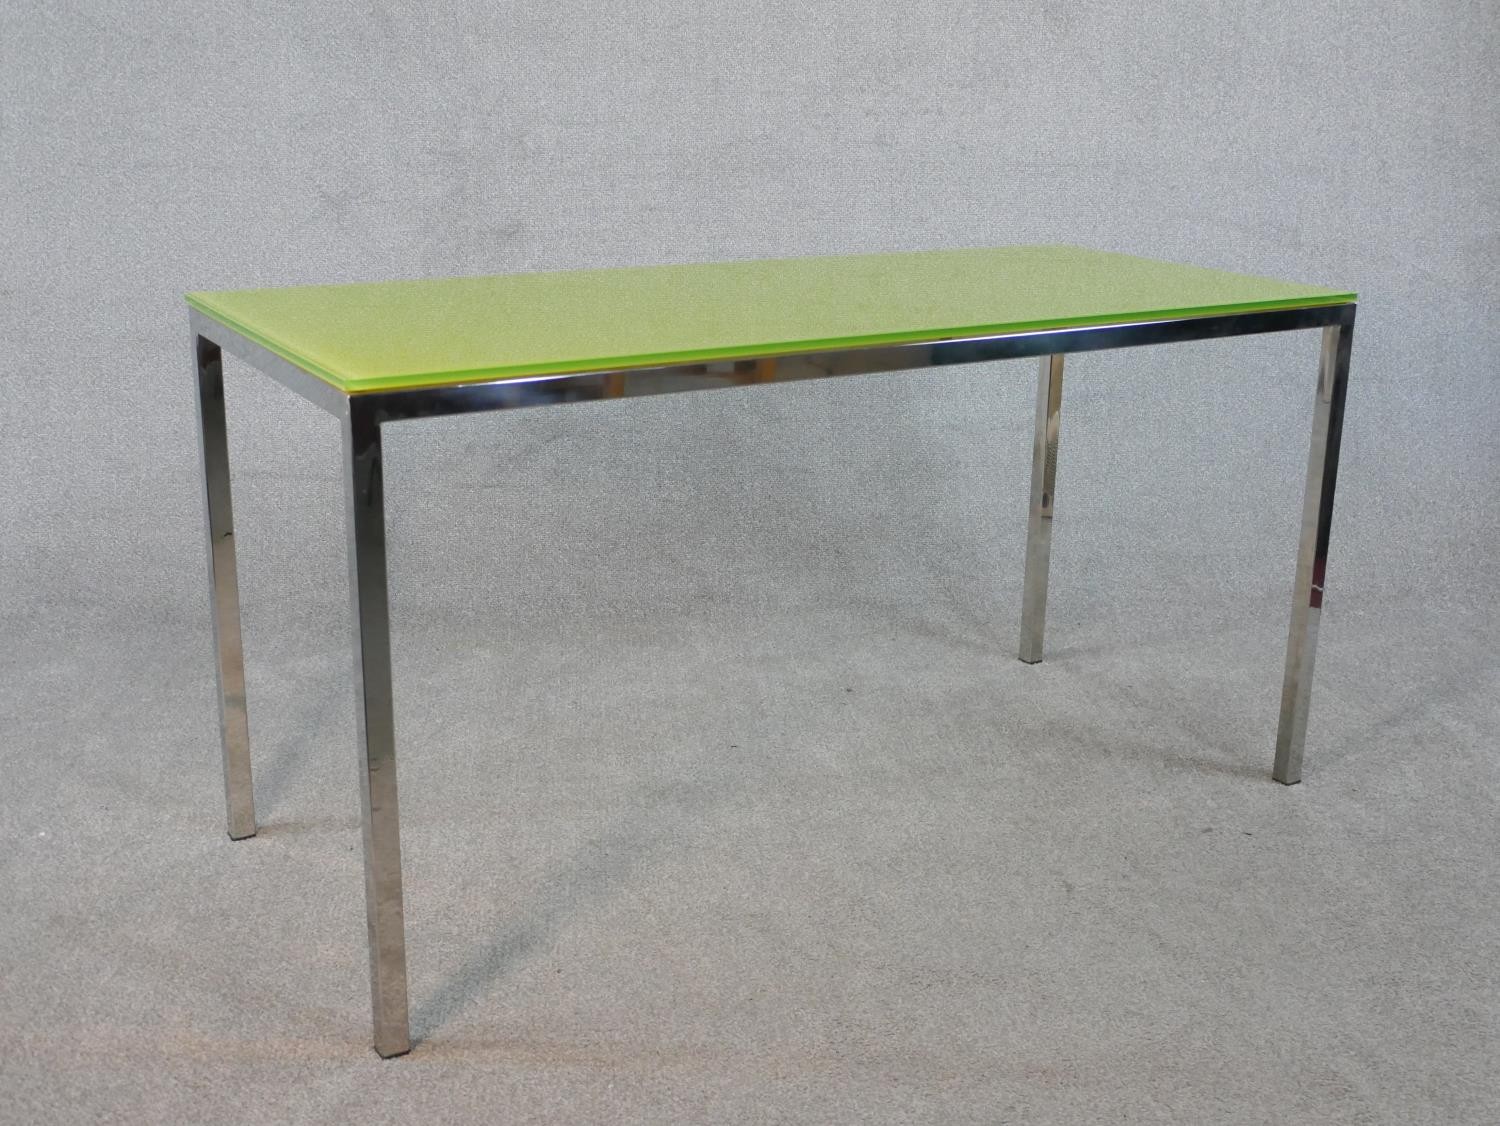 Driade ‘Jelly Slice’ Console Table by Philippe Starck, acid bathed painted chartreuses tempered - Image 3 of 4